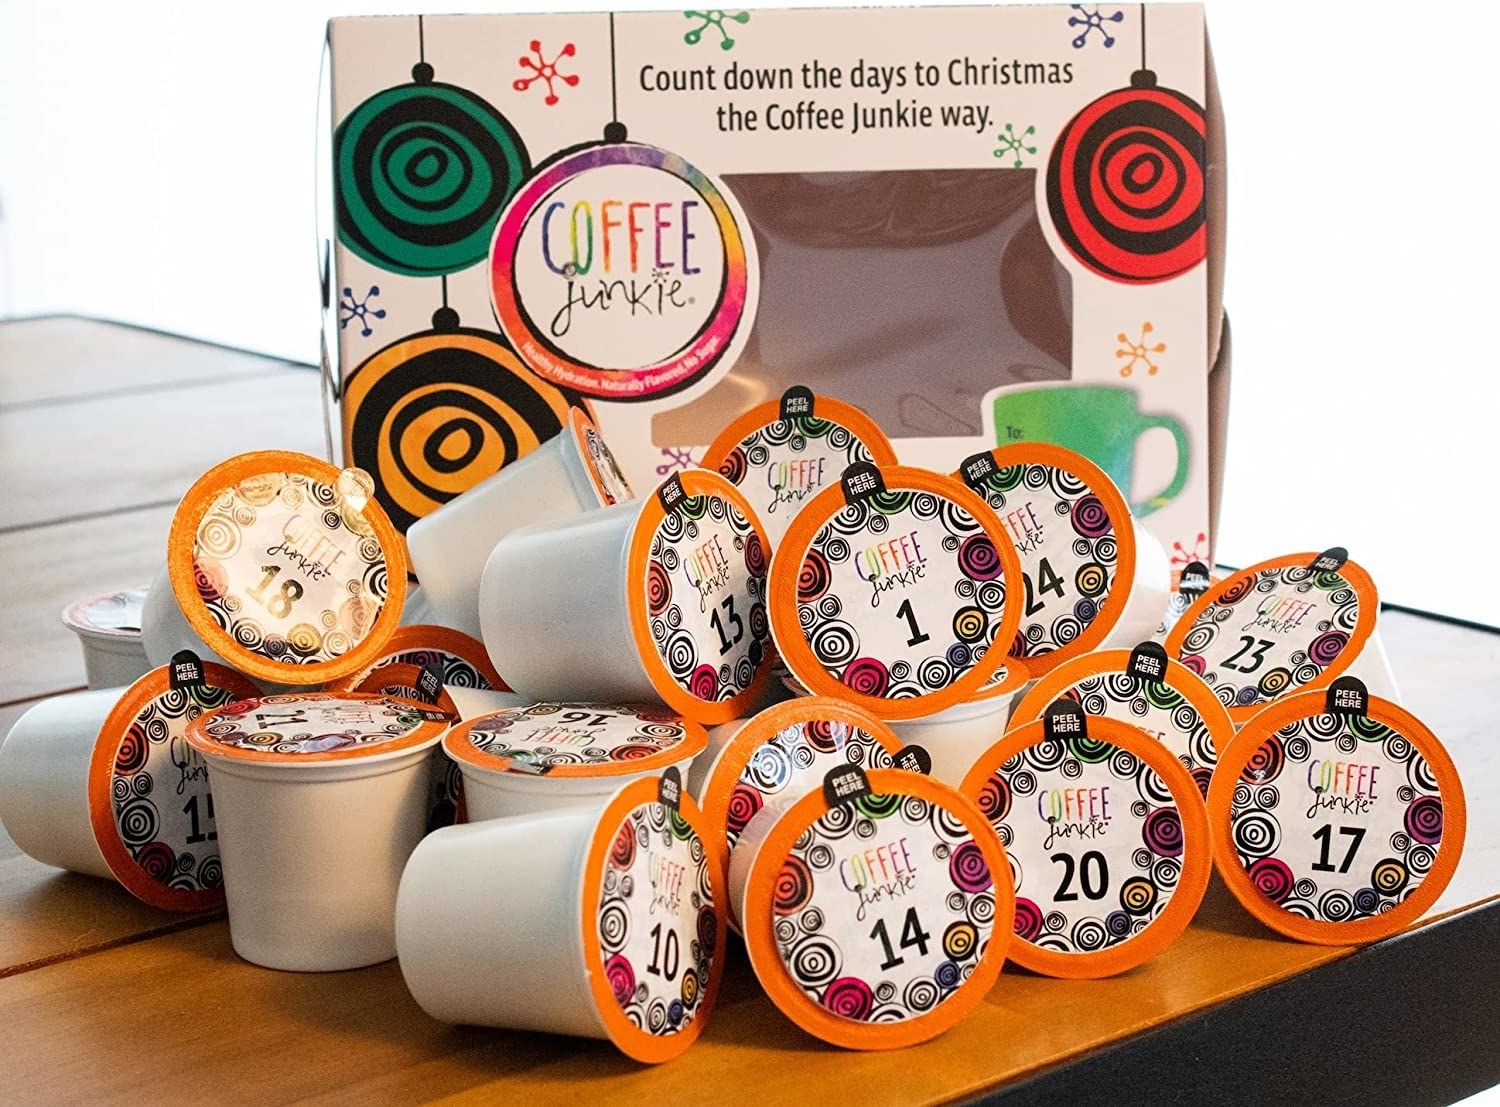 the coffee pods piled together